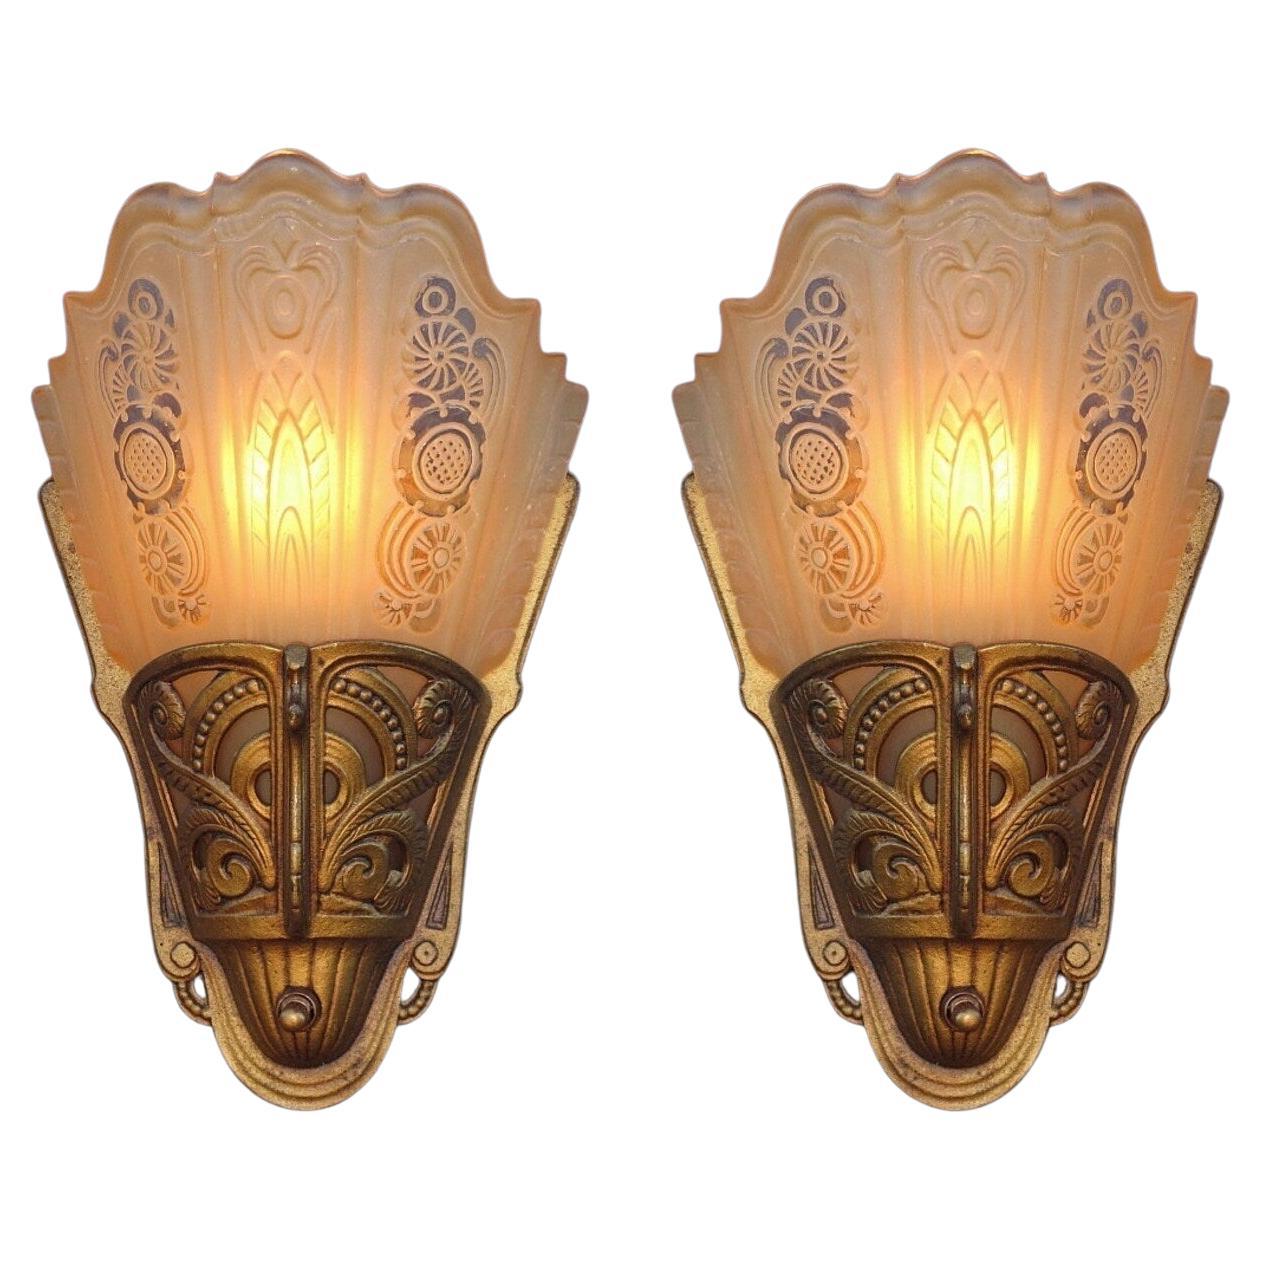 Pair Vintage Restored Regal Sconces with Consolidated Shades priced per pair